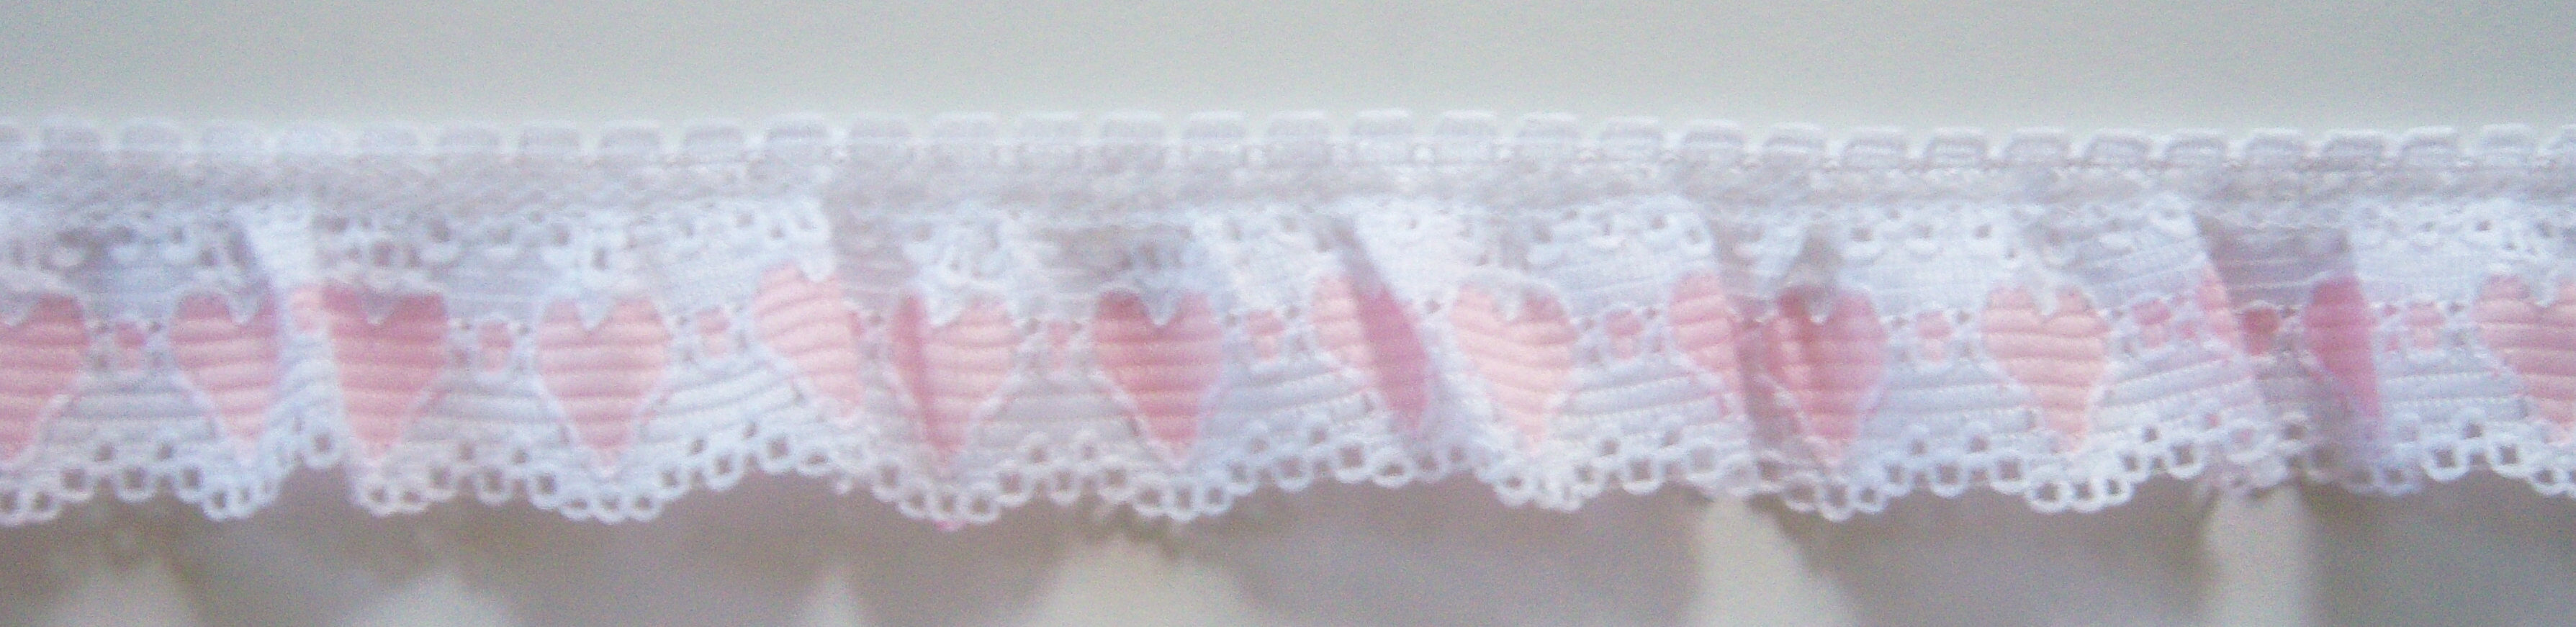 White/Pink Hearts 1" Ruffled Lace